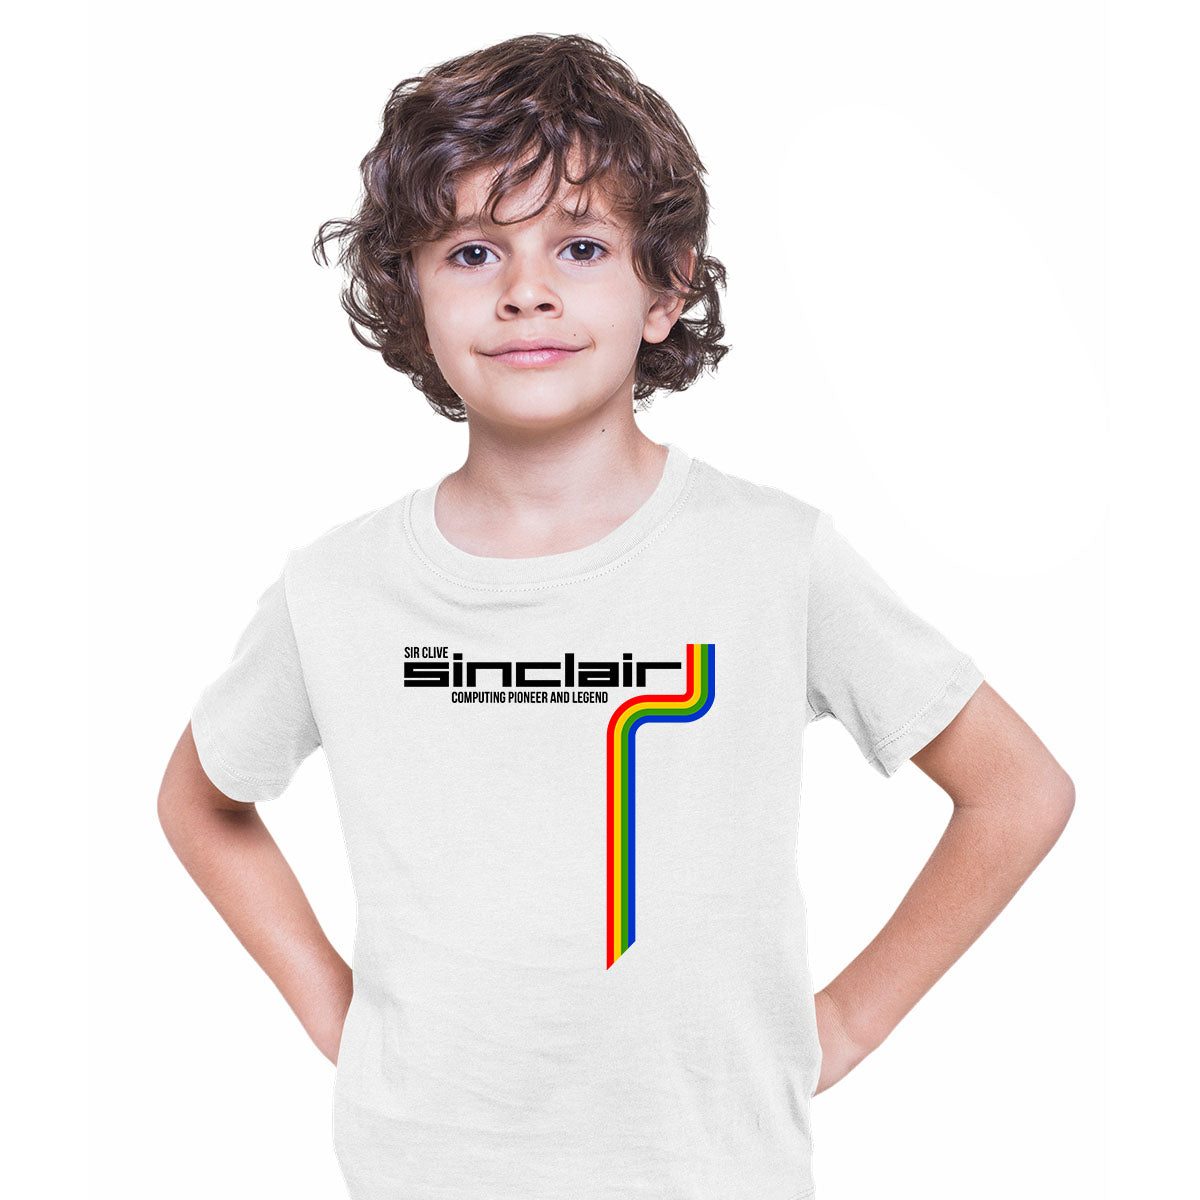 RIP Sir Clive Sinclair Computing pioneer and legend T-shirt for Kids - Kuzi Tees